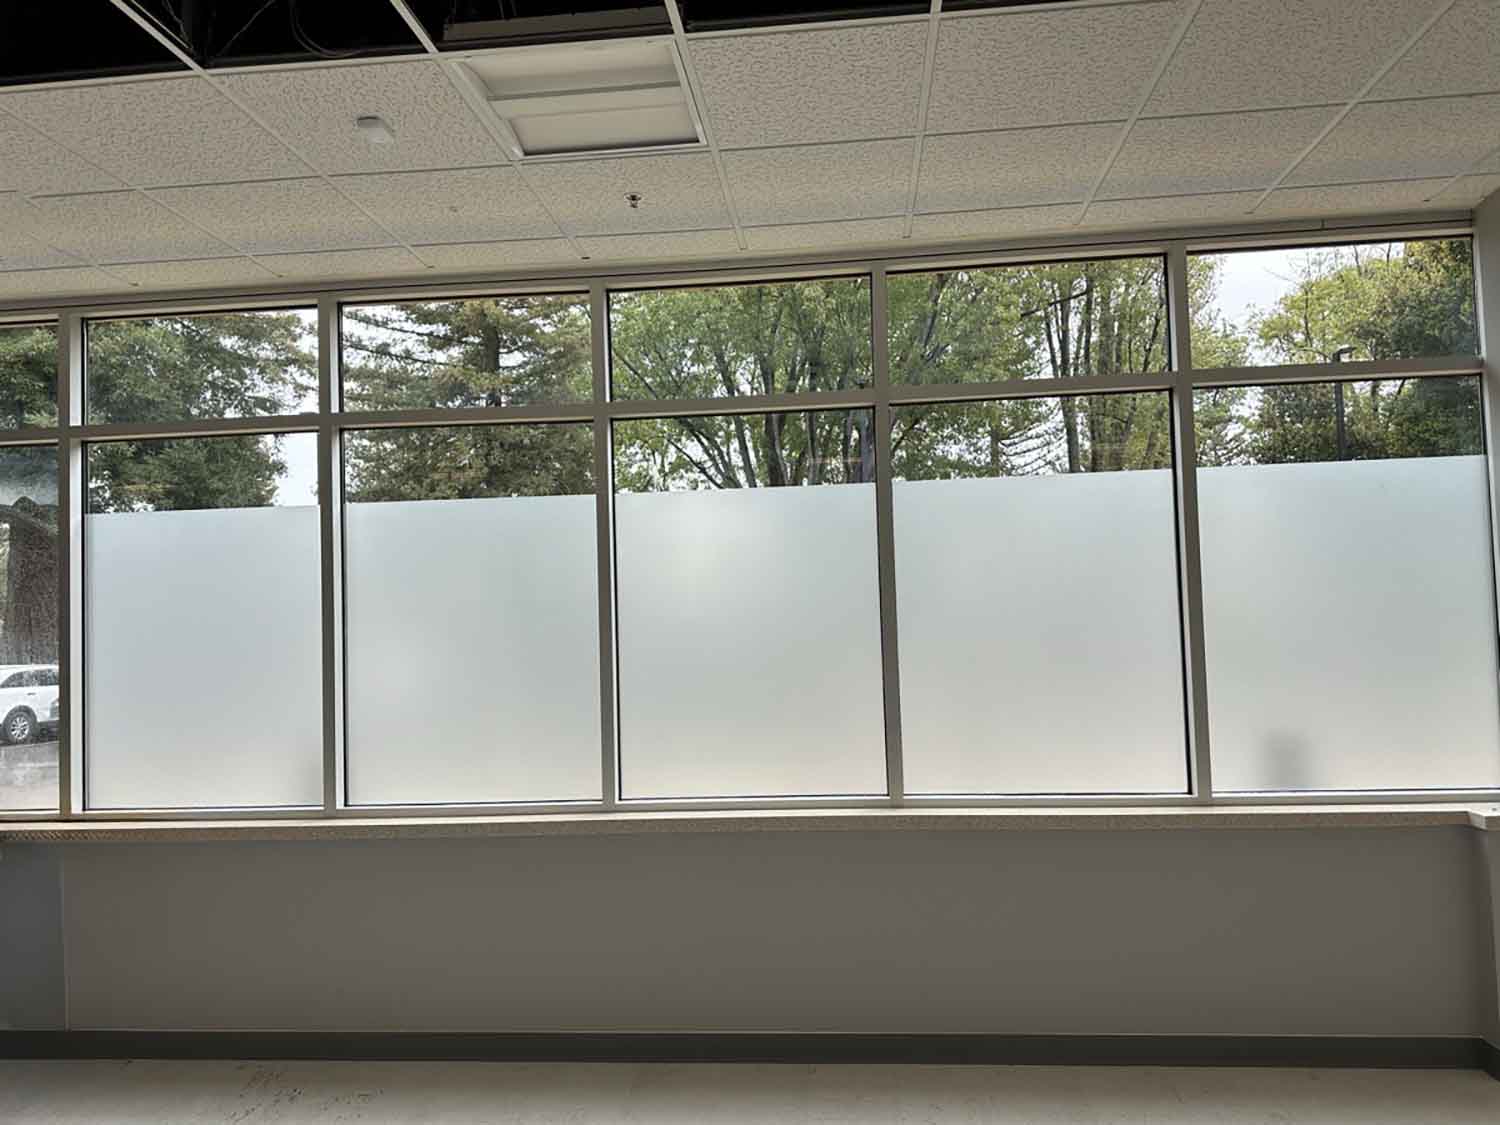 How To Get 3M Privacy Window Film for Your San Jose, CA Office: Call ClimatePro for a free consultation.